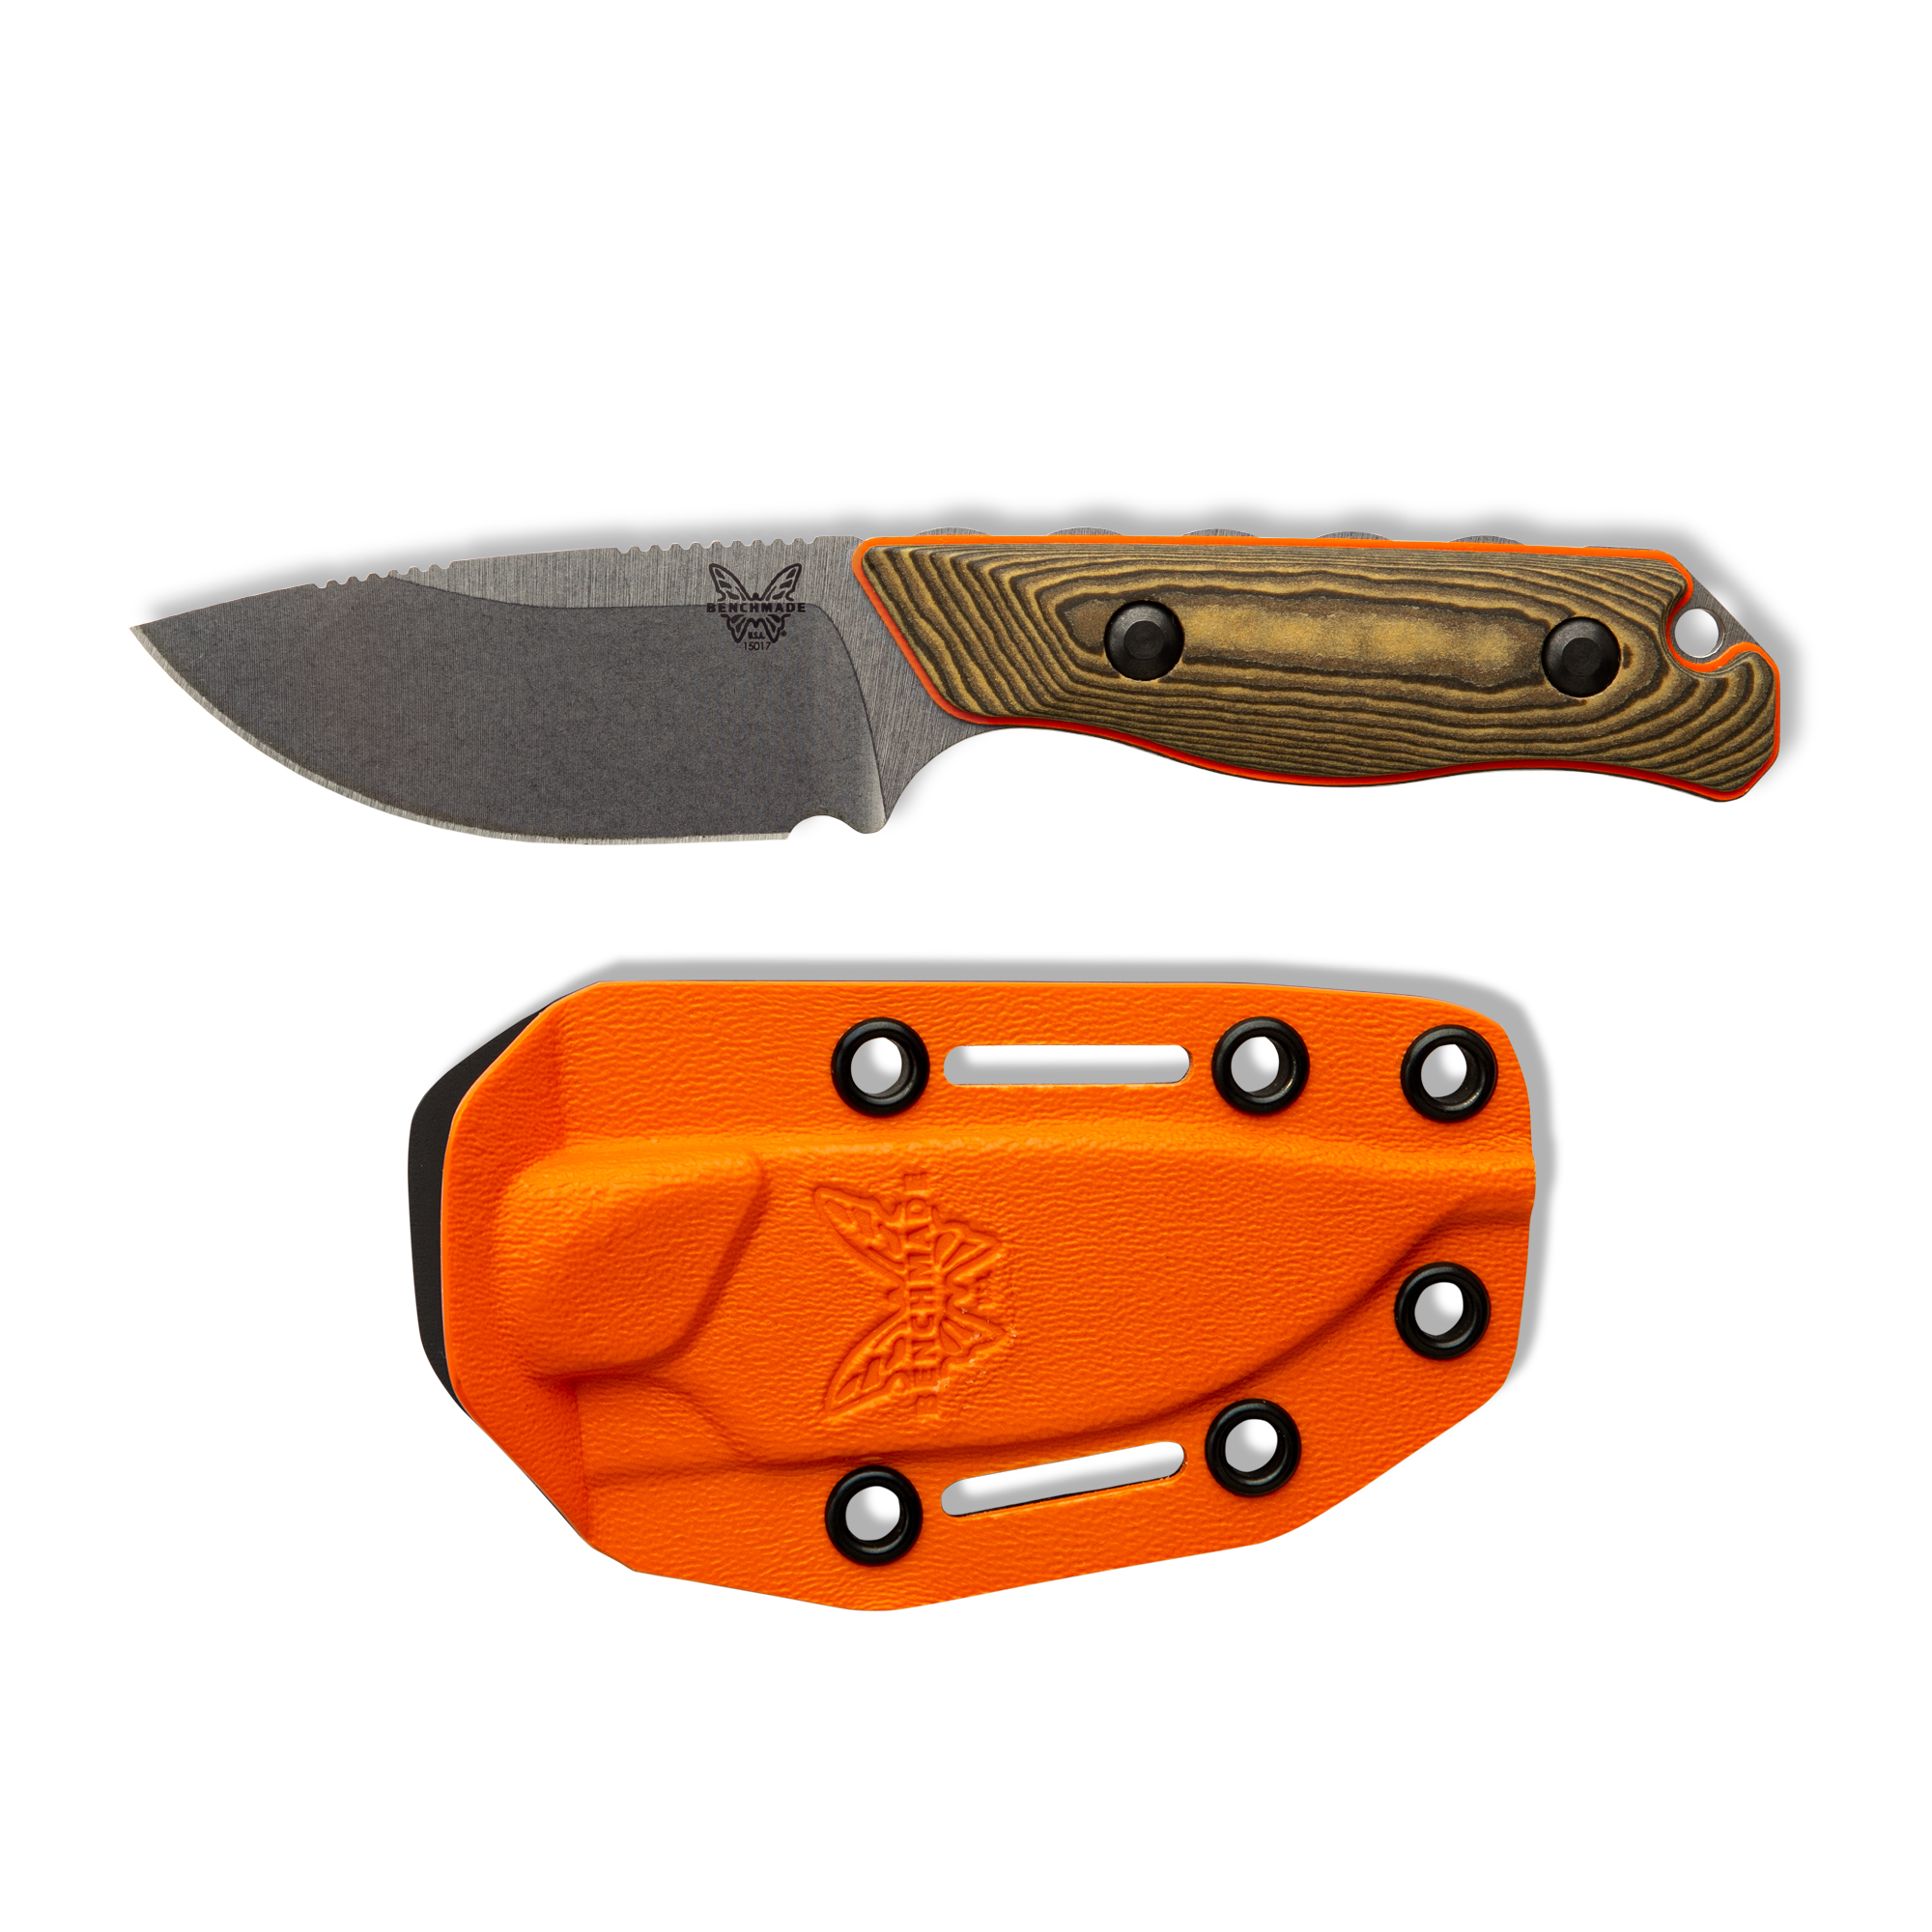 Benchmade Hidden Canyon Hunter Knife | MeatEater